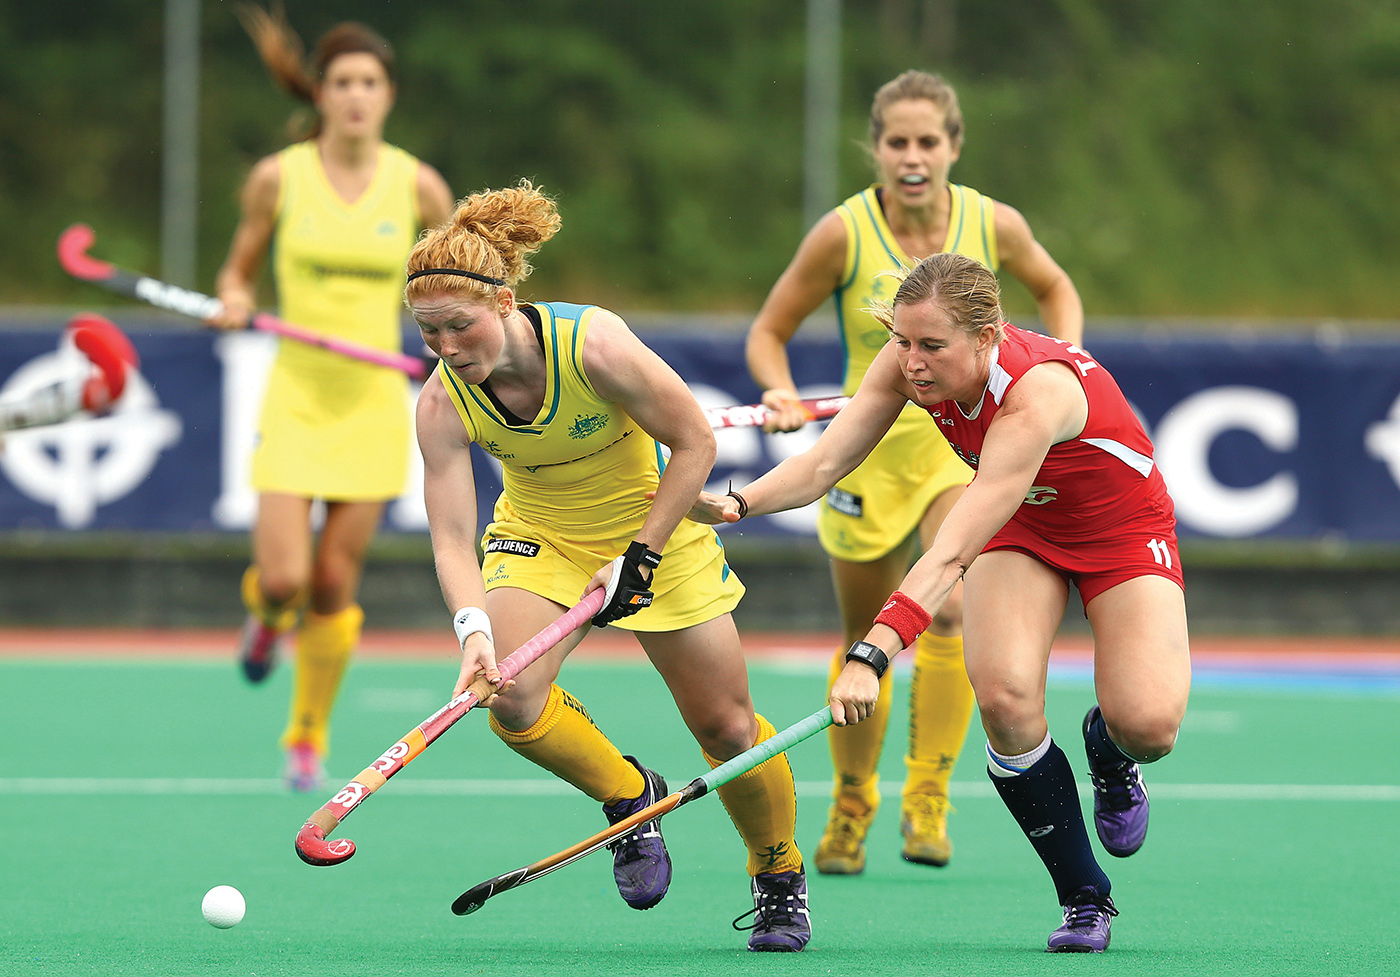 In June, the U.S. women’s field hockey team battled Australia in a Hockey World League match in London. The sport is popular internationally, and new tournaments and events in the U.S. are helping grow the game. Photo Courtesy of Jan Kruger/Getty Images